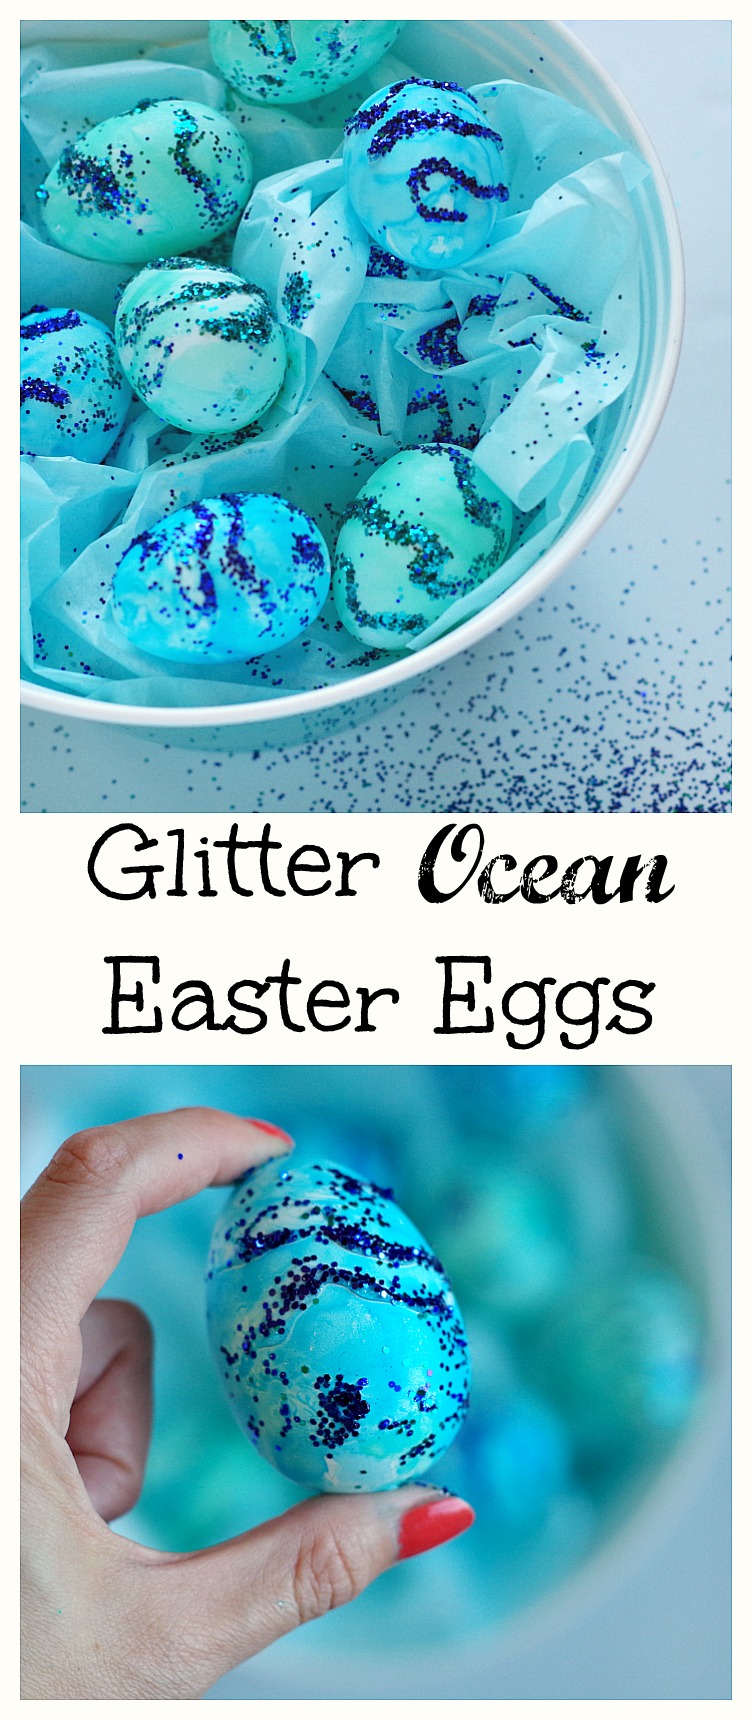 Glitter ocean easter eggs are a beautiful easter decoration and way to decorate eggs